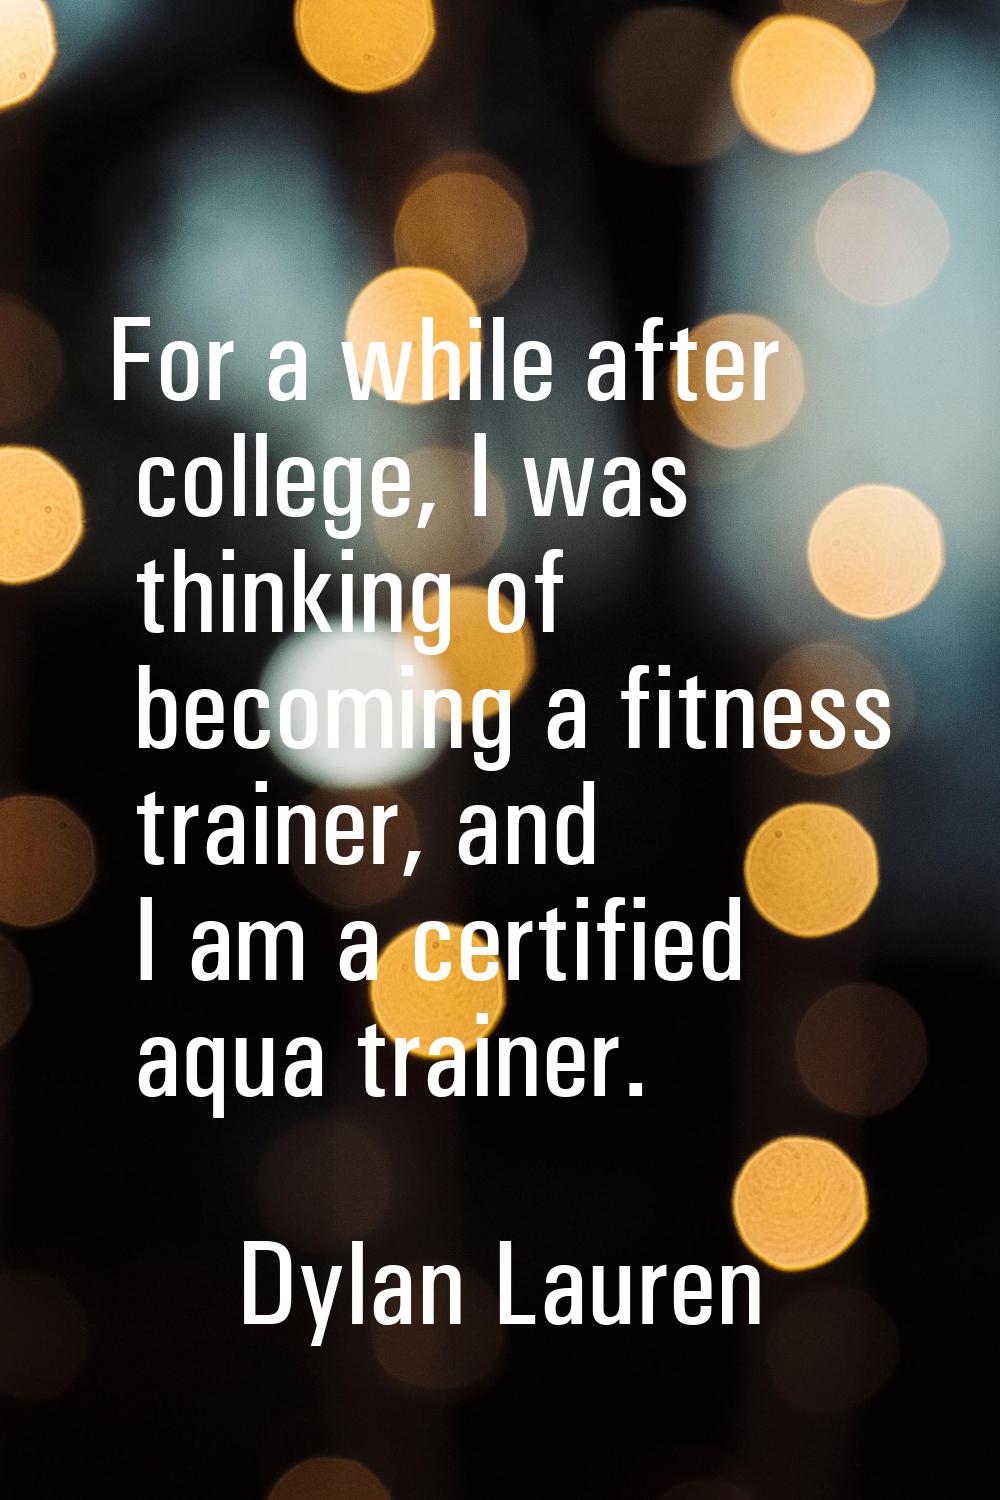 For a while after college, I was thinking of becoming a fitness trainer, and I am a certified aqua 